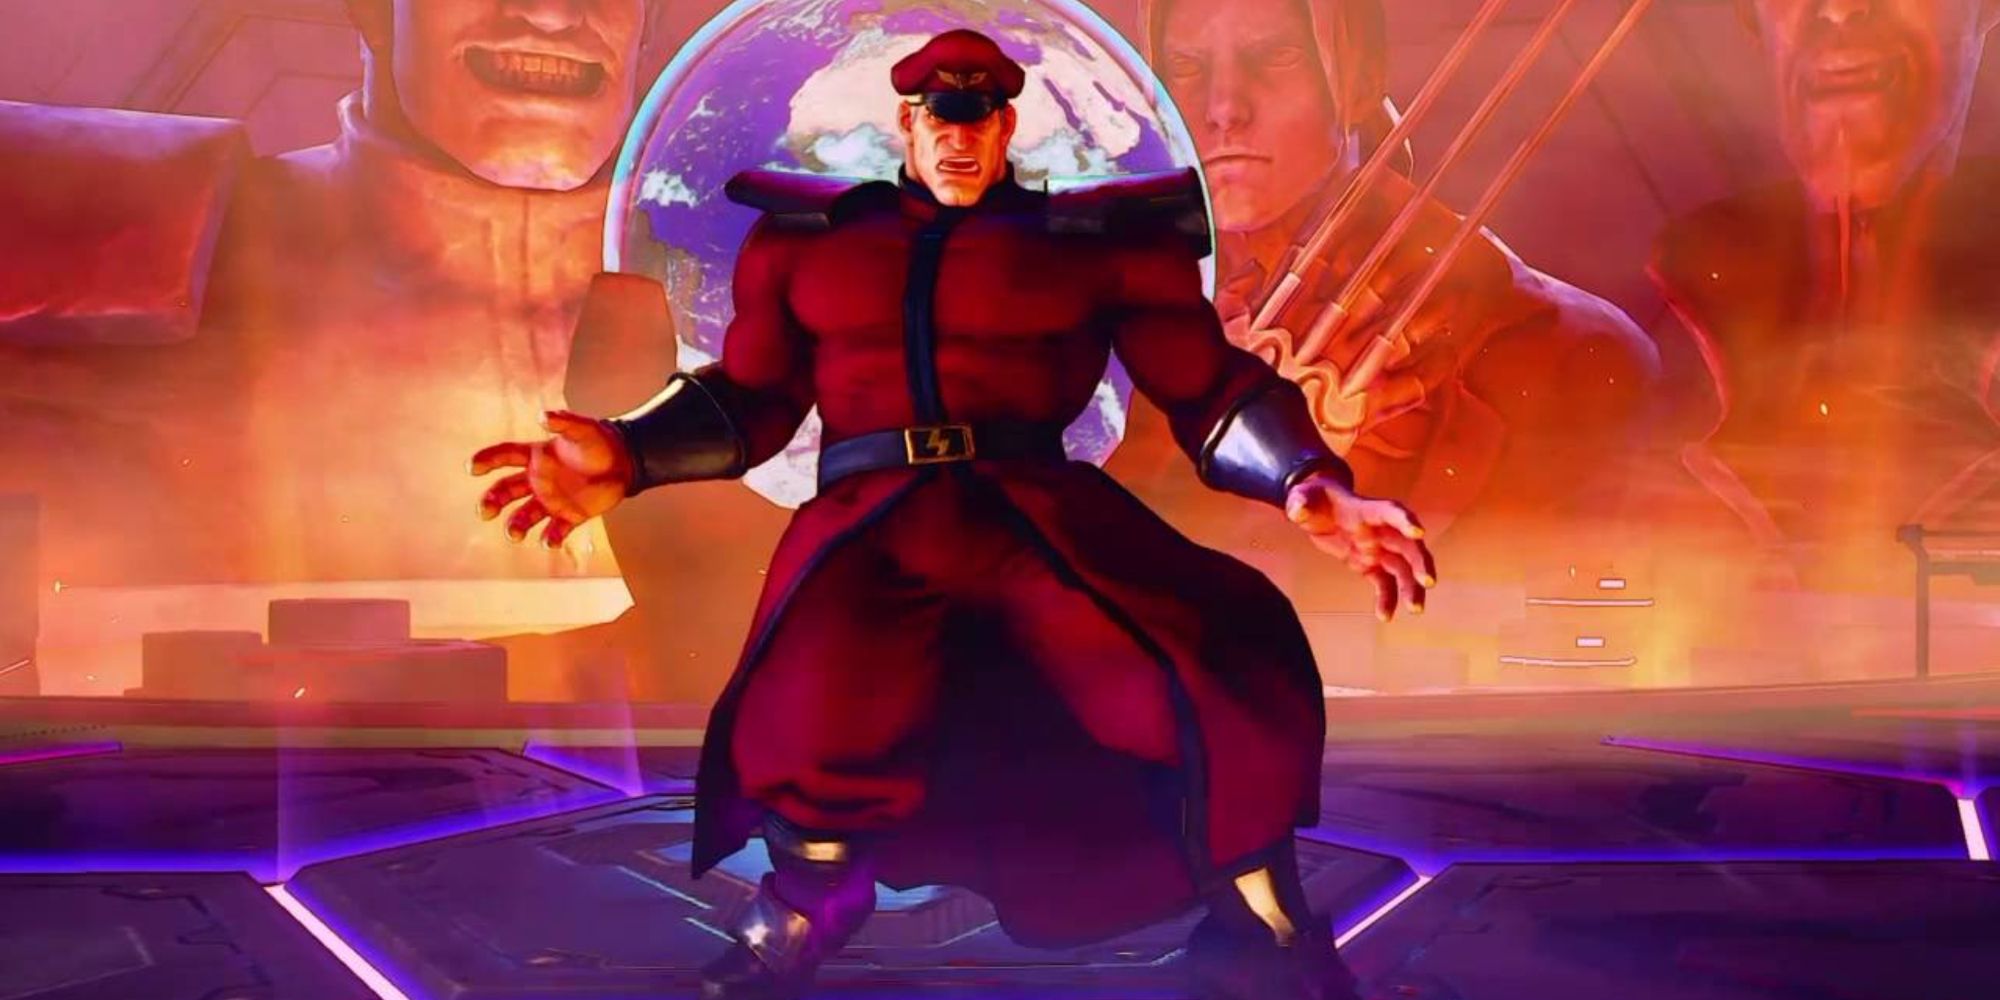 The death of M. Bison in Street Fighter 5